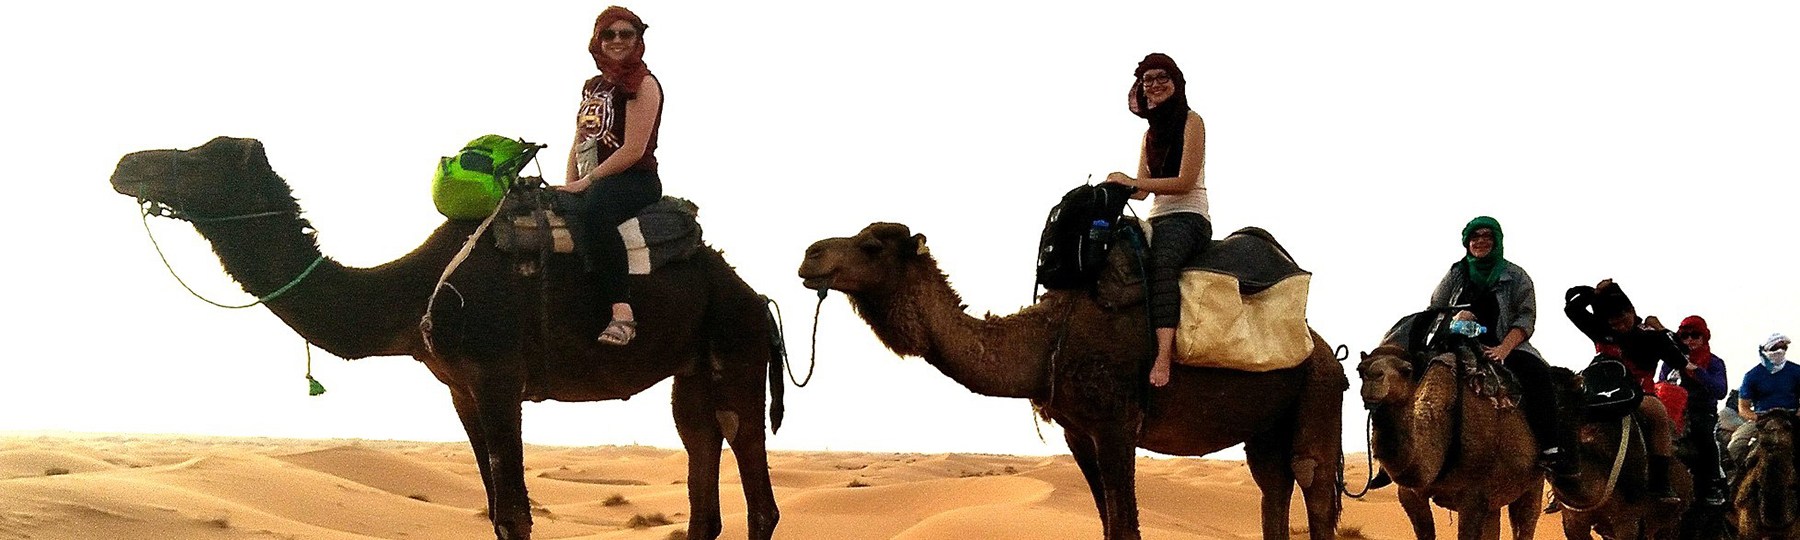 Central Michigan students on camels